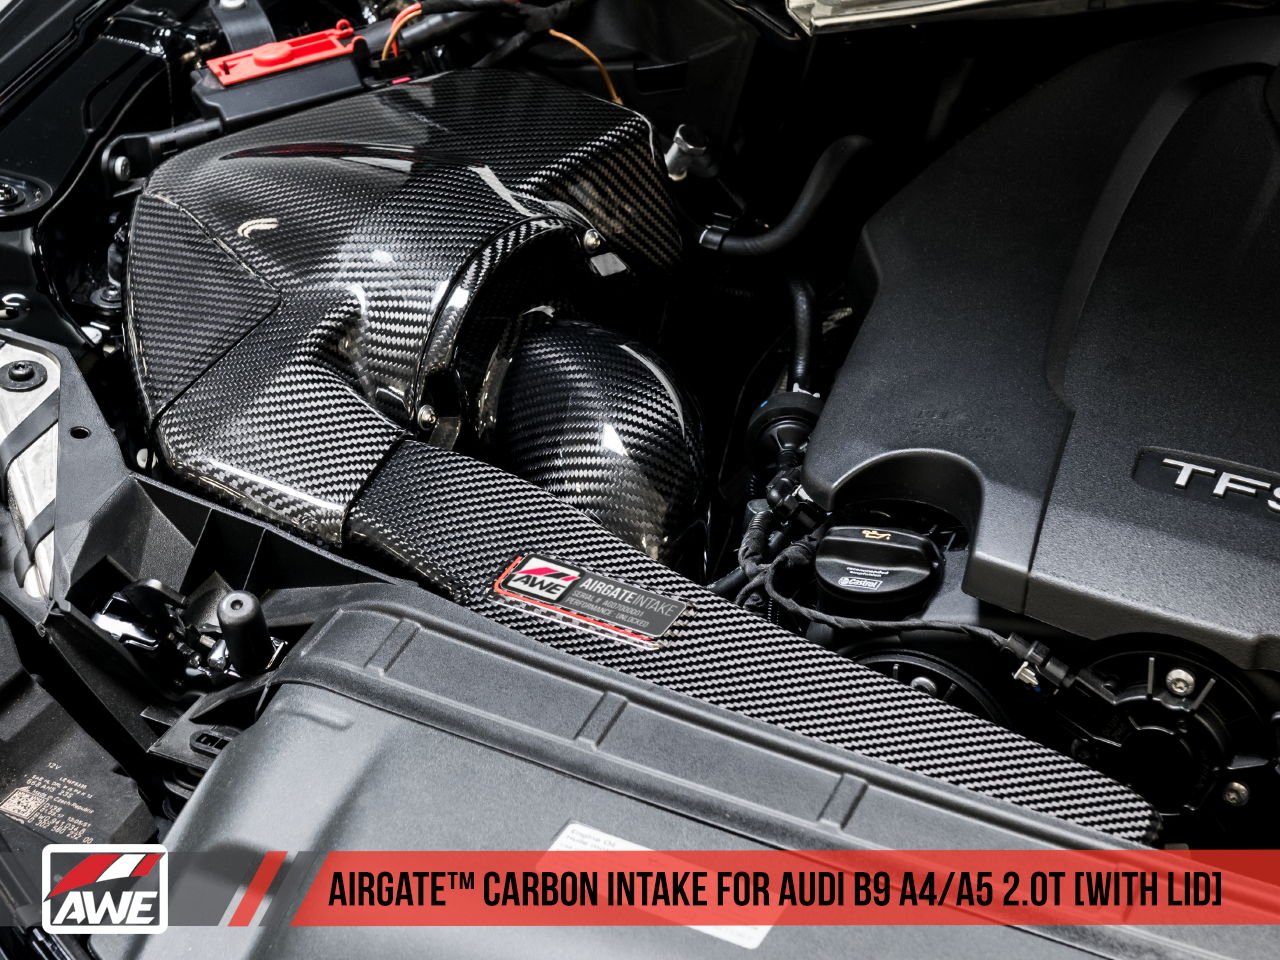 AirGate Carbon Fiber Intake for Audi B9 A4 / A5 2.0T - With Lid